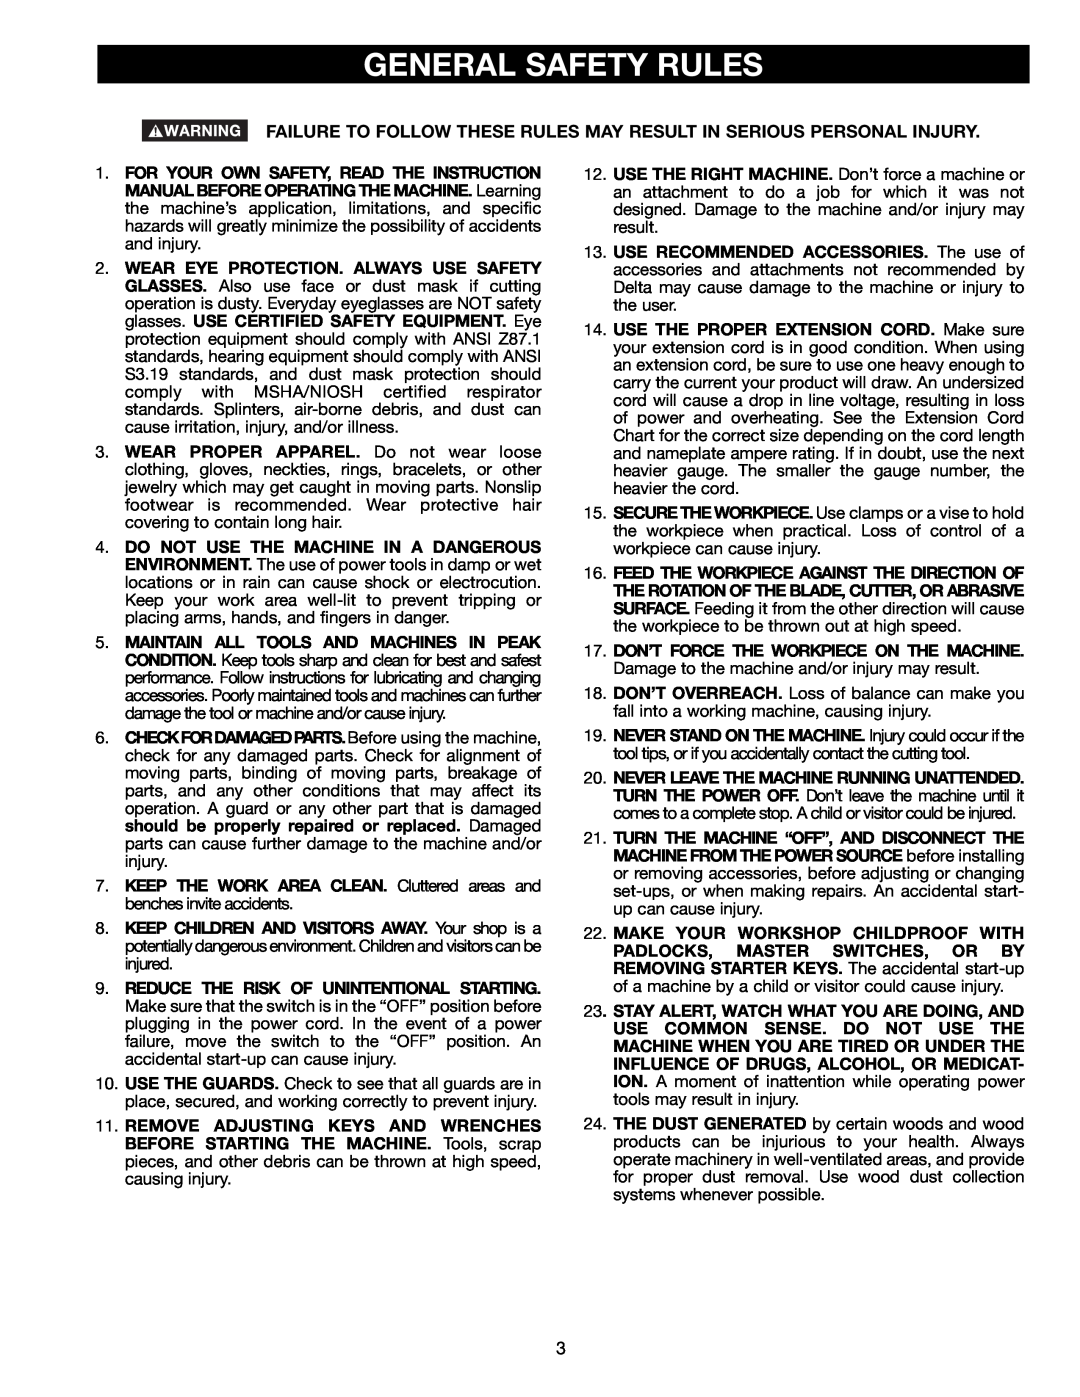 Delta 36-465 instruction manual Failure To Follow These Rules May Result In Serious Personal Injury, General Safety Rules 